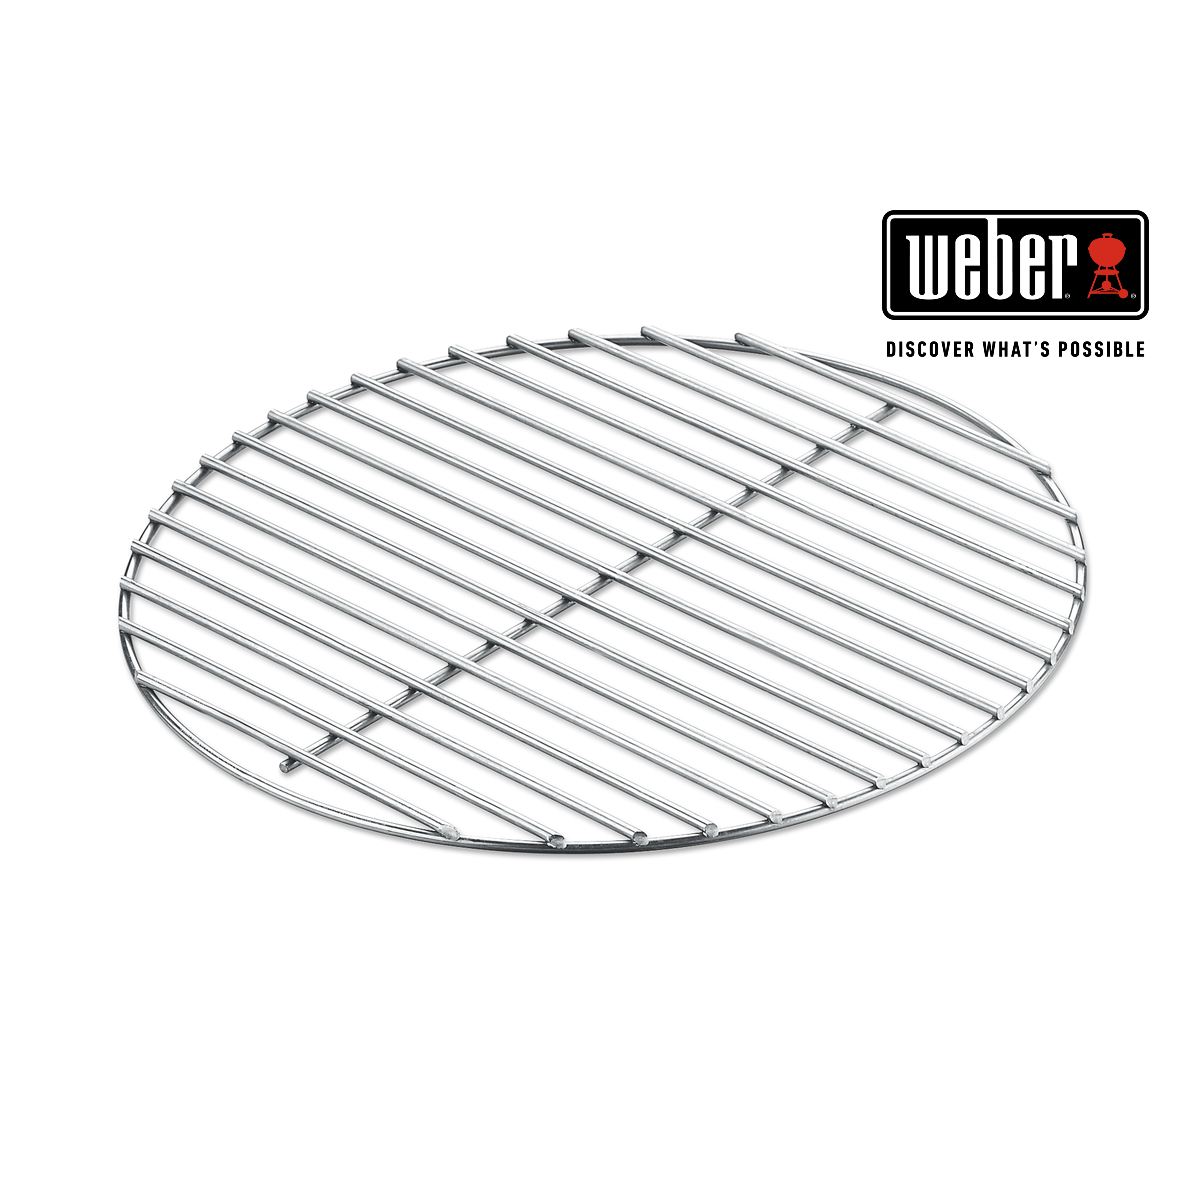 WEBER grill coal roast size 34cm for BBQ 47cm, 7440